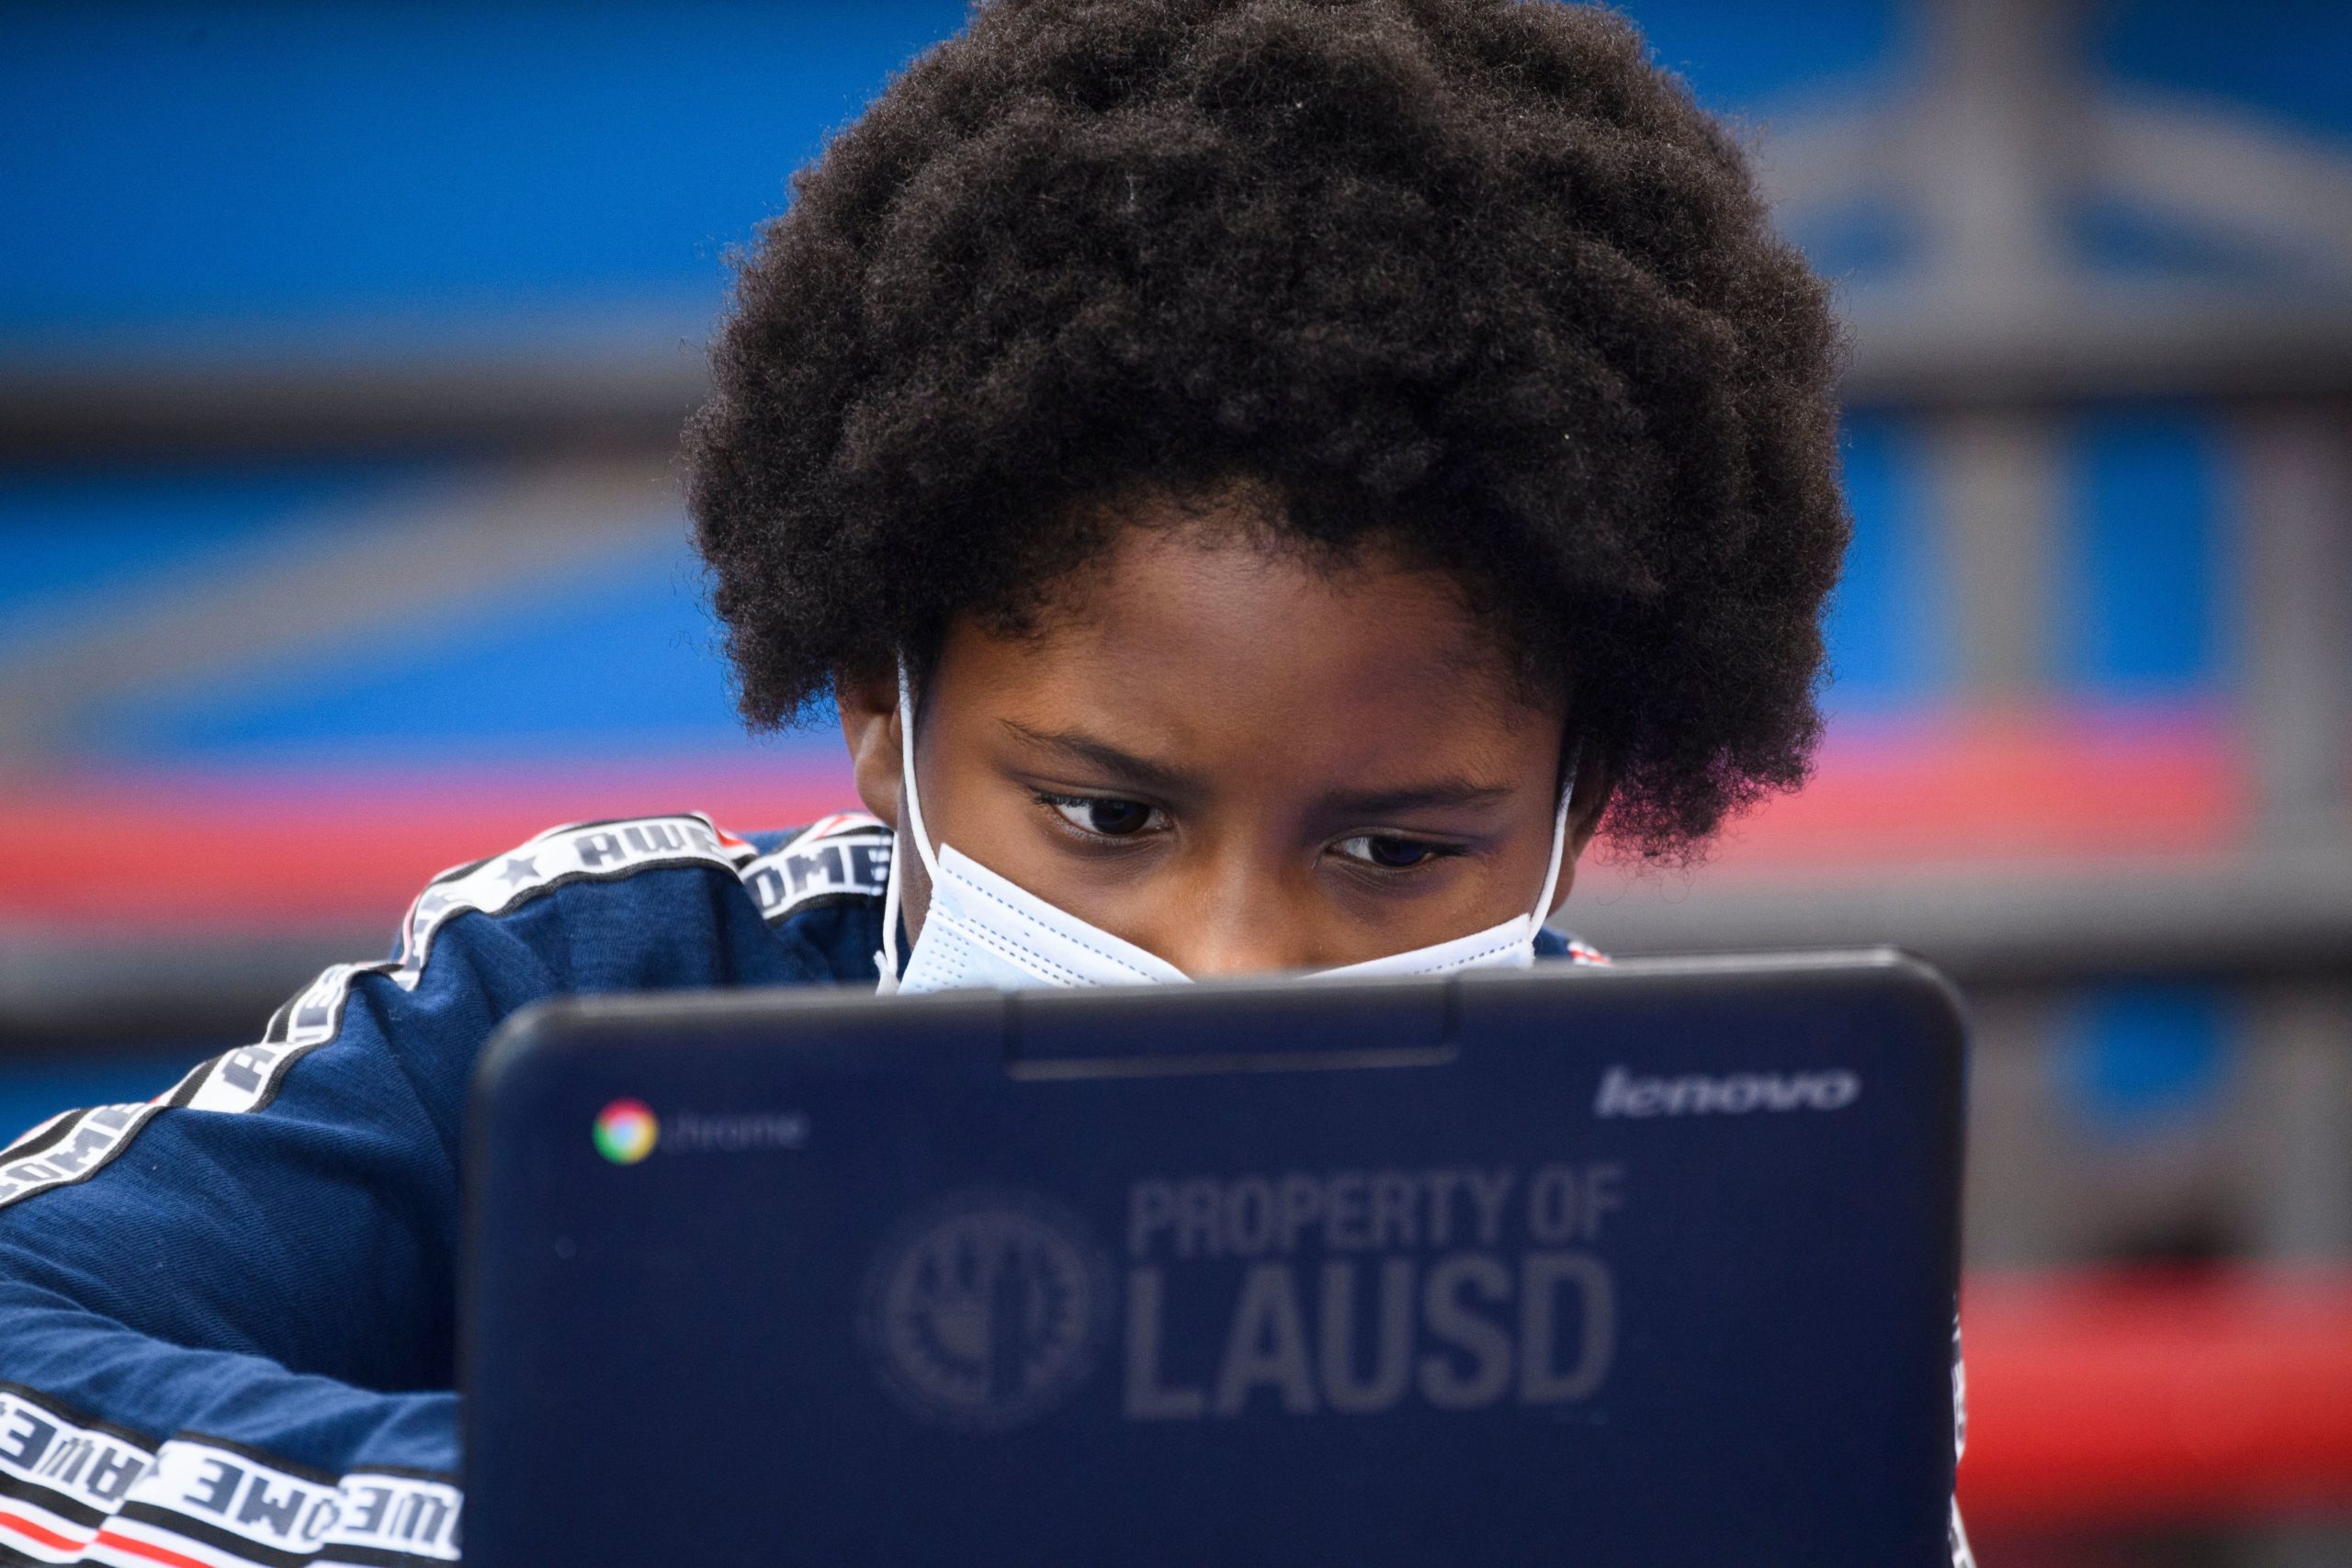 A child wears a face mask as they attend an online class at a learning hub inside the Crenshaw Family YMCA during the Covid-19 pandemic on February 17, 2021 in Los Angeles, California. (Photo by PATRICK T. FALLON/AFP via Getty Images)